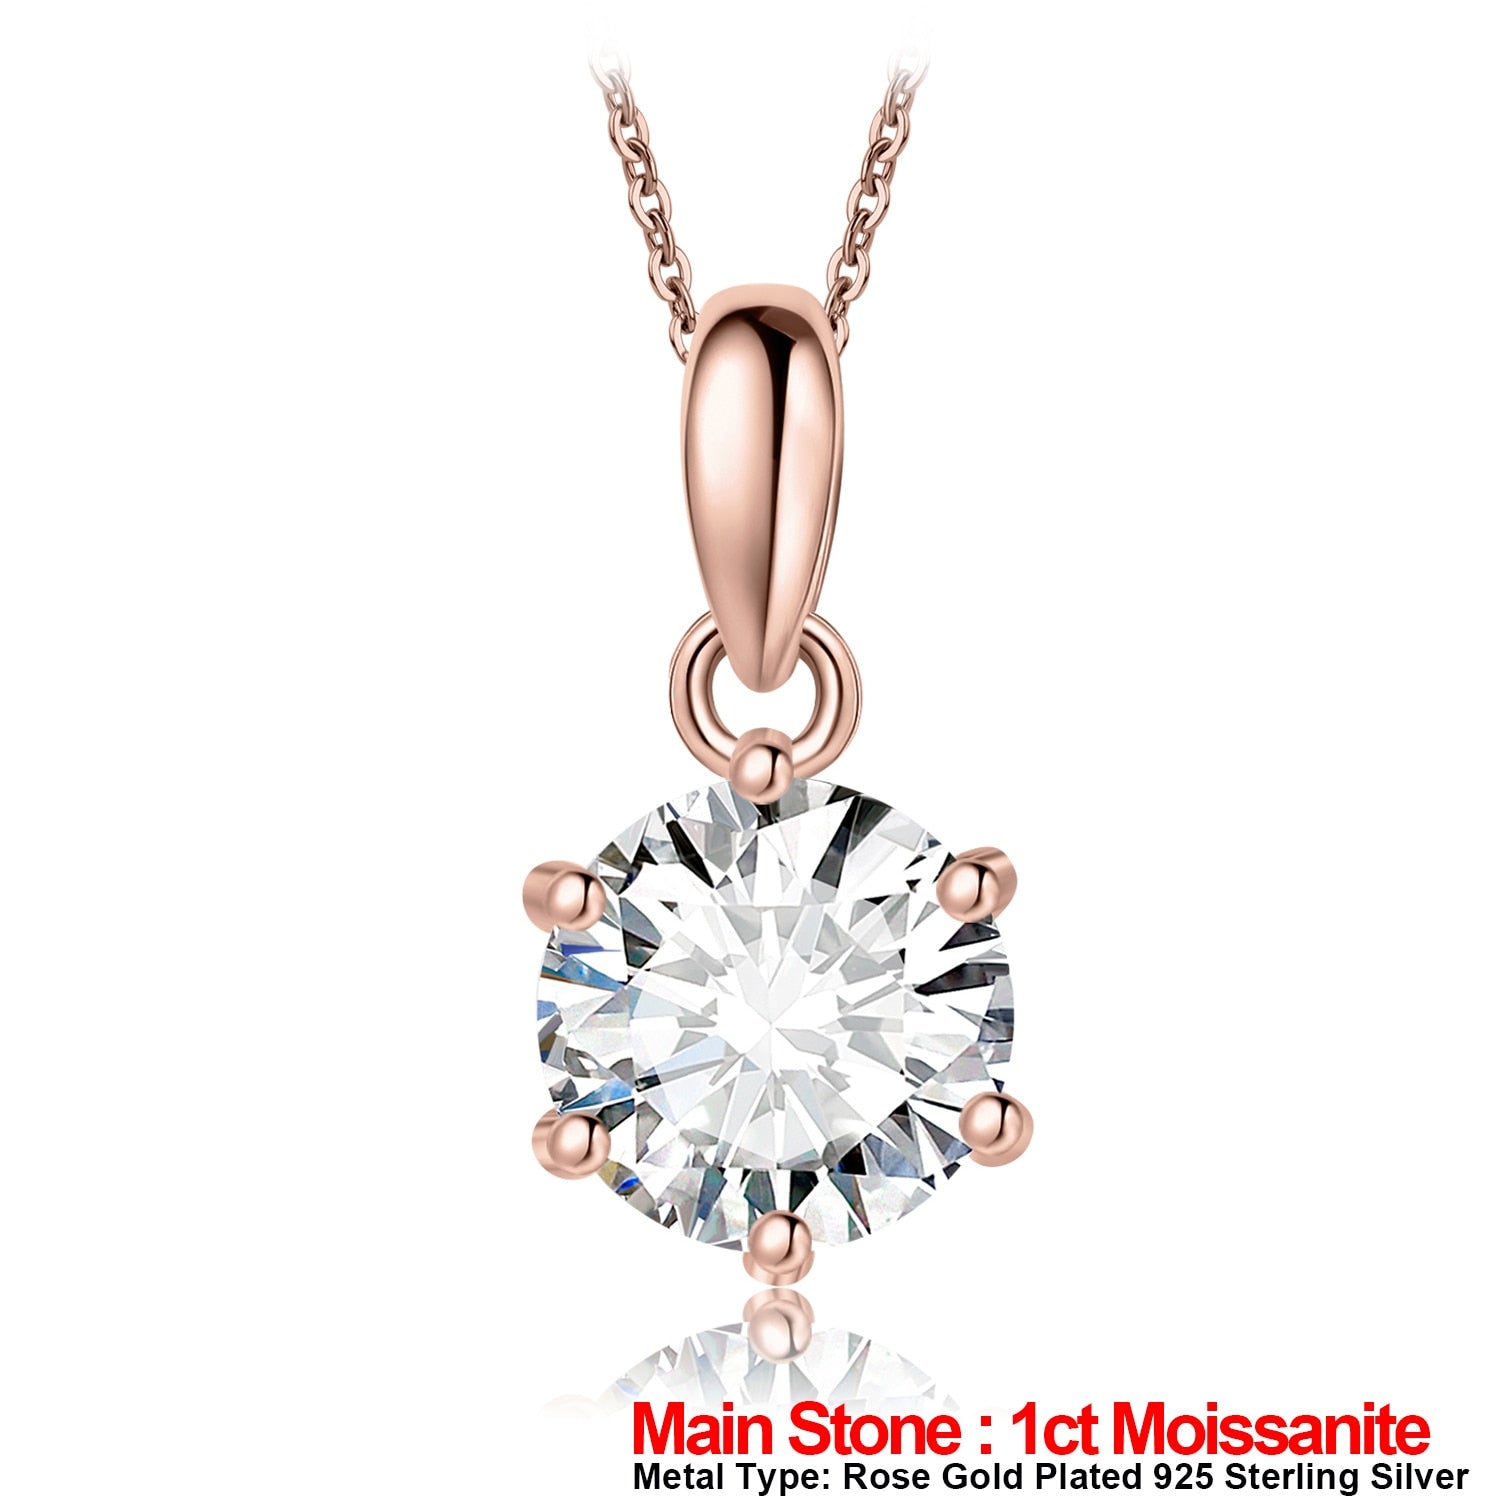 JewelryPalace Moissanite D Color 1ct 1.5ct 2ct 3ct Round 925 Sterling Silver Pendant Necklace for Woman No Chain Rose Gold Plated GRA Certificate